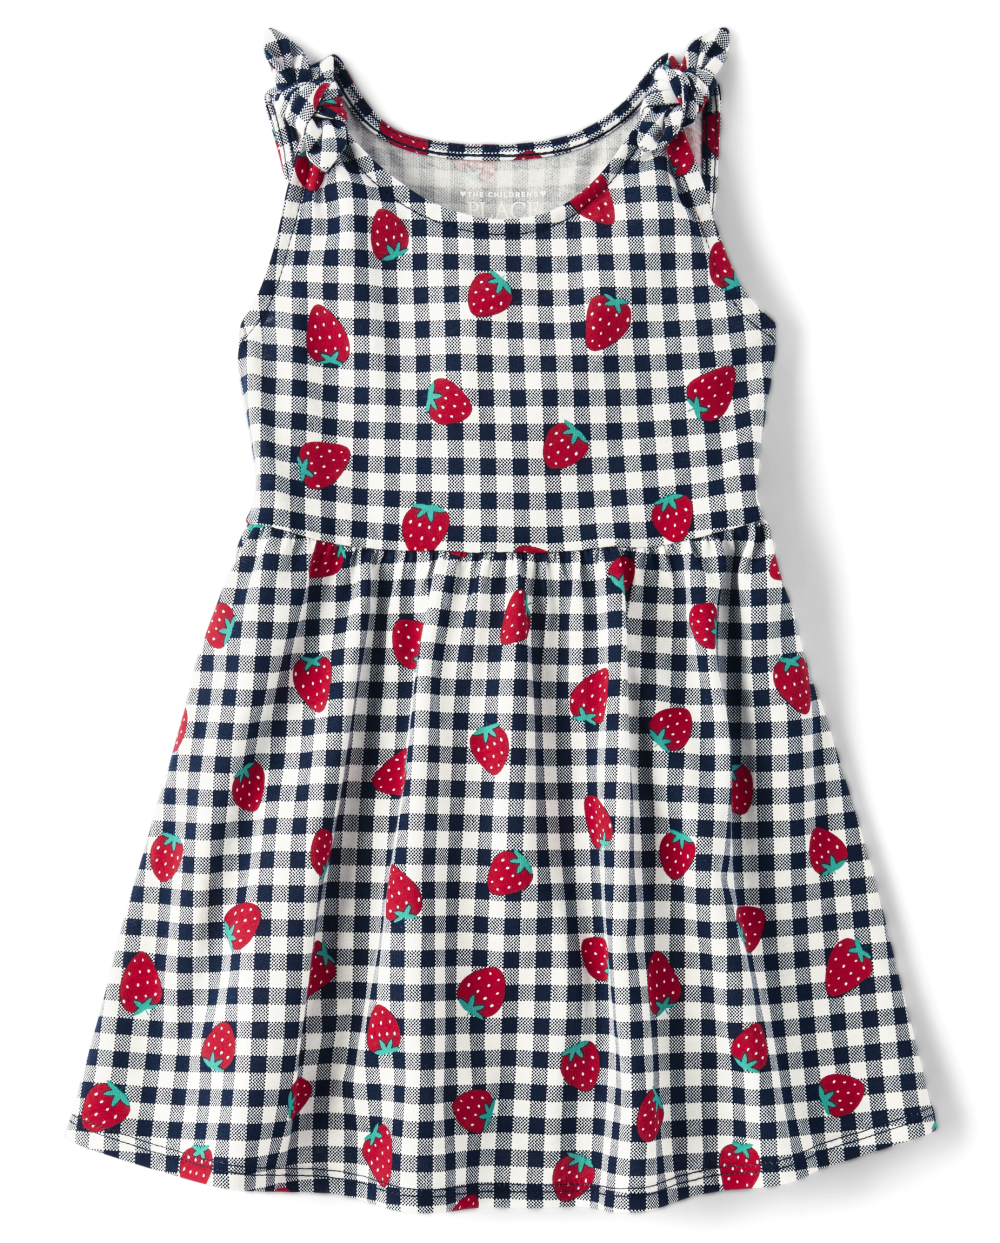 Toddler Baby Sleeveless Checkered Gingham Print Above the Knee Scoop Neck Dress